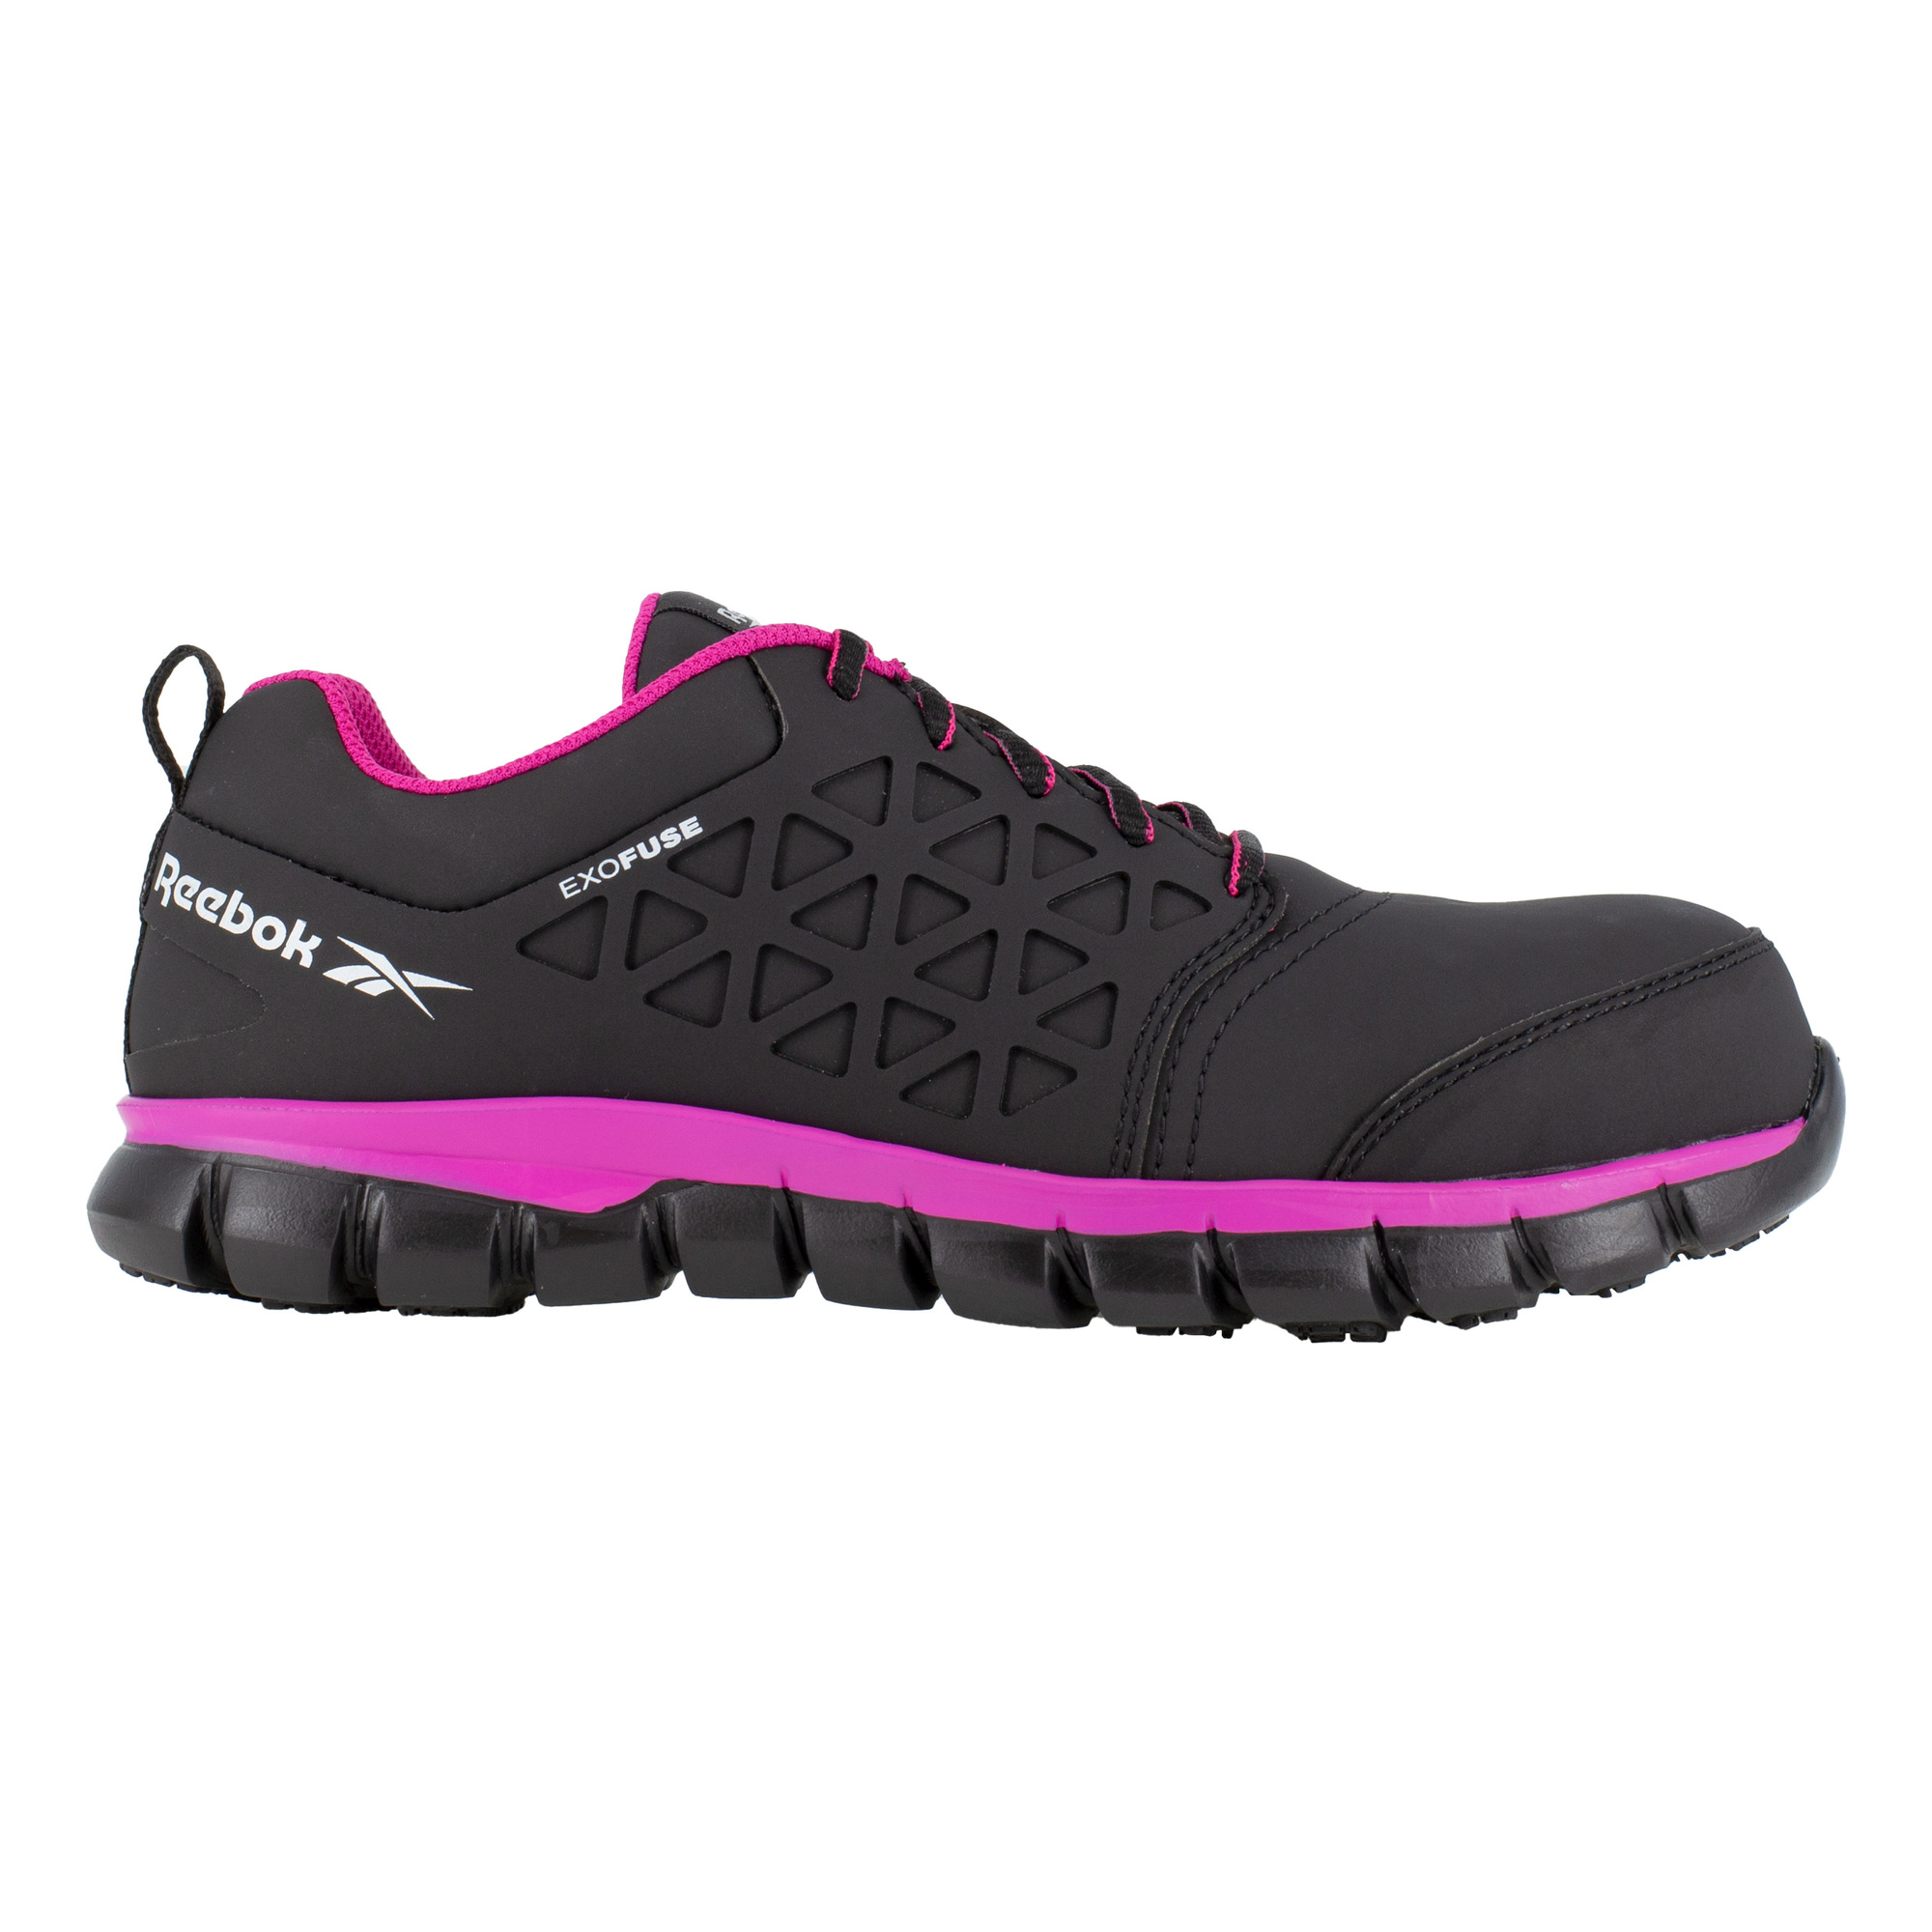 Athletic Work Shoe, Size 11, Width Wide, Color Black and Pink, Model# RB491 | Northern Tool